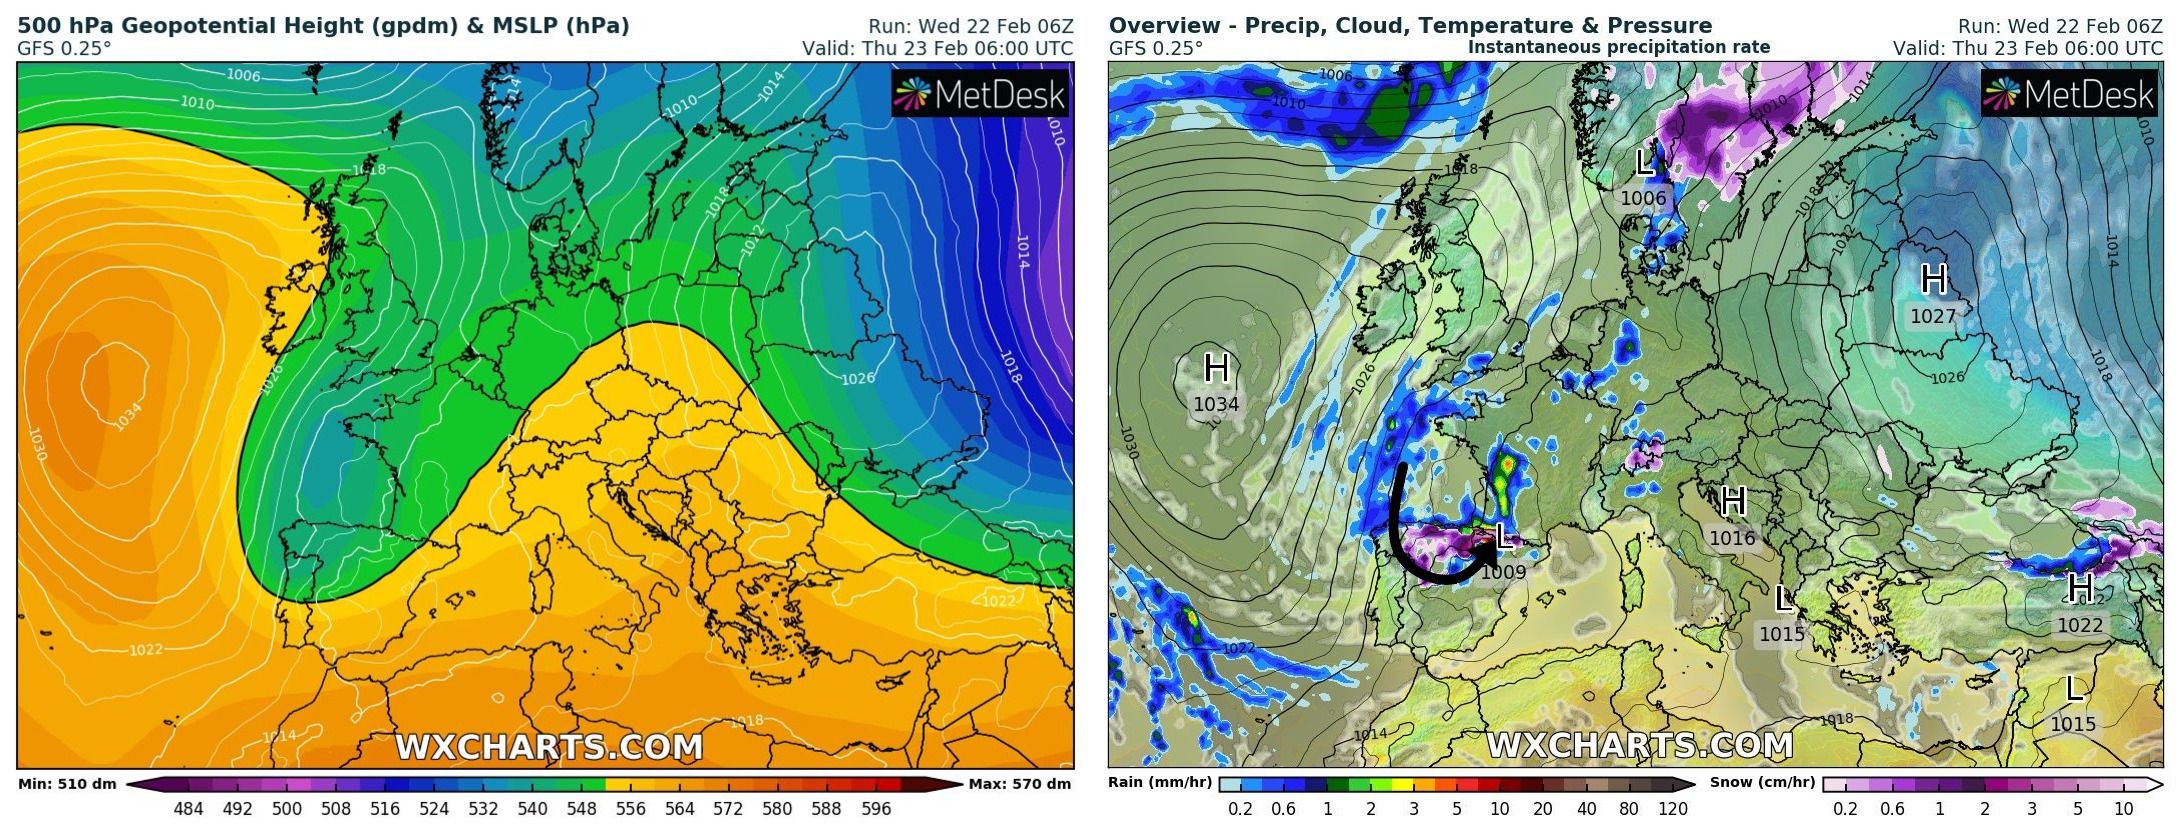 Snow for the Pyrenees (wxcharts.com)